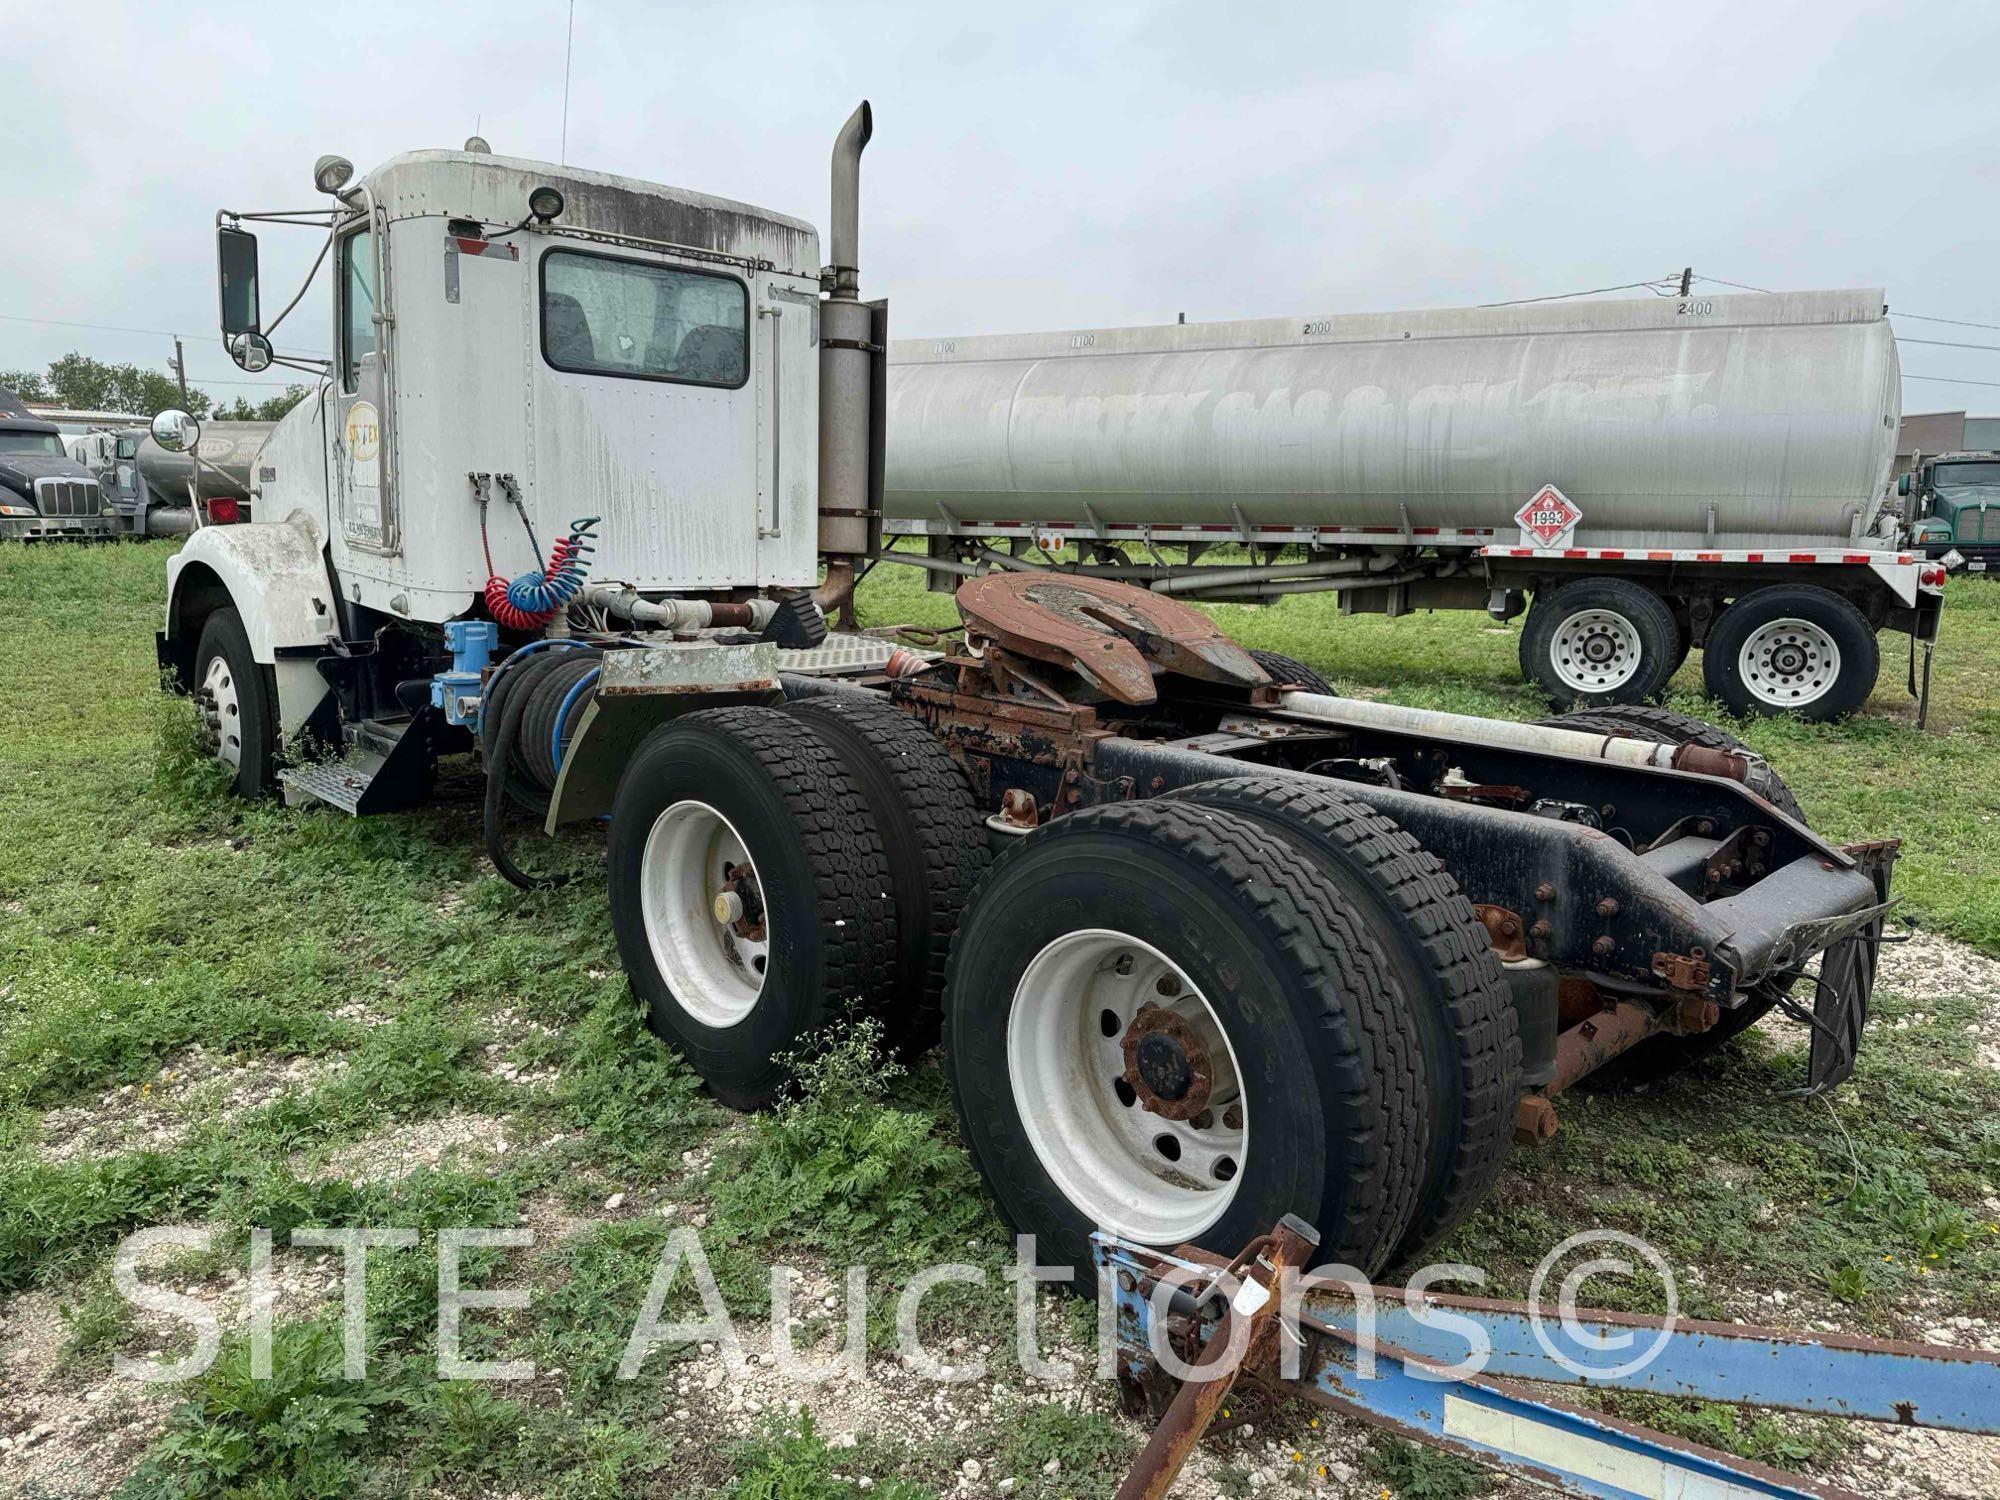 1997 Kenworth T800 T/A Daycab Truck Tractor